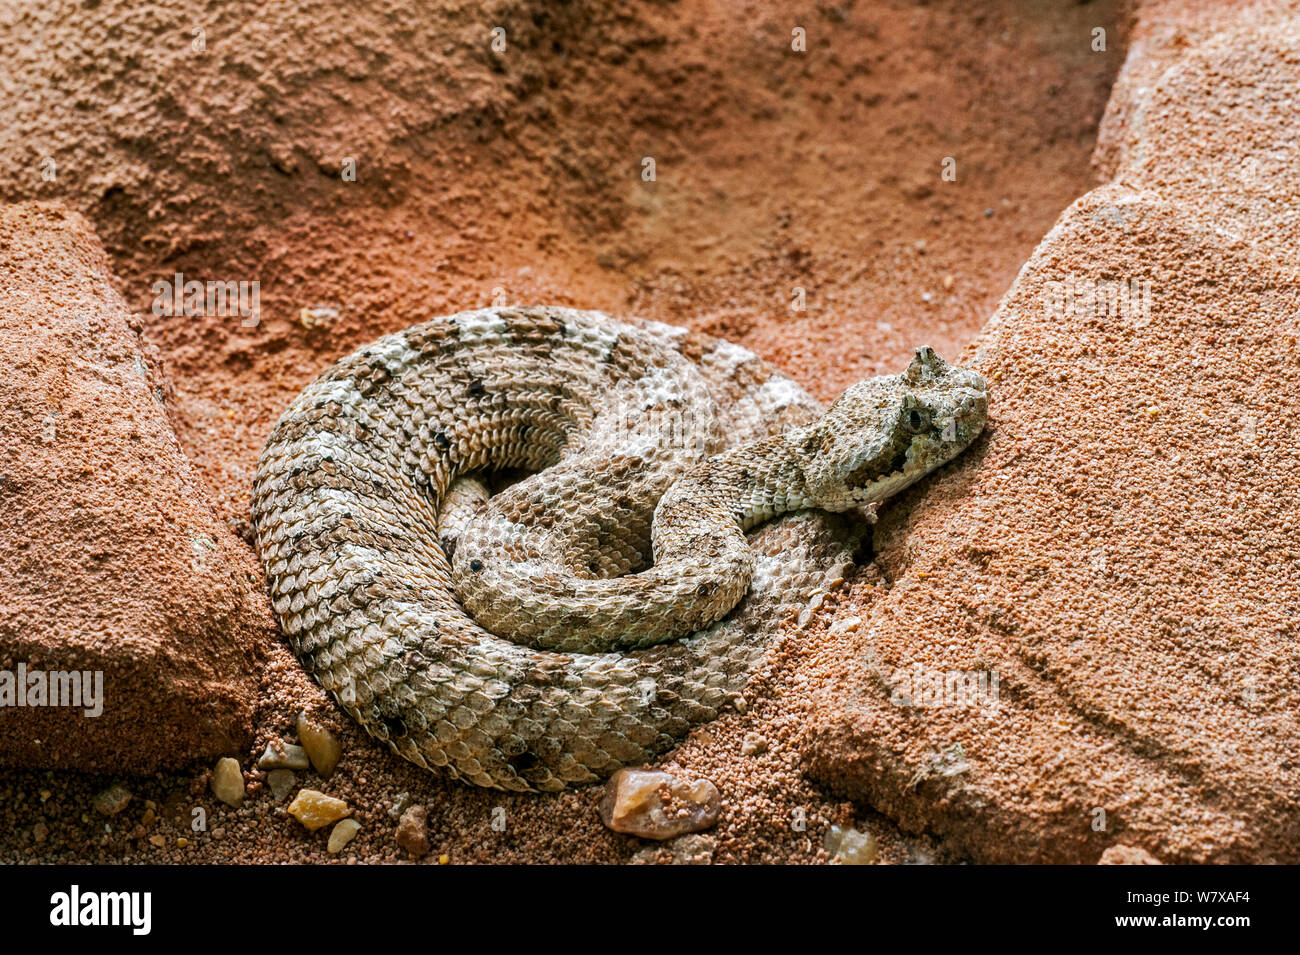 Sidewinder (Crotalus cerastes), venomous species, captive. Occurs in the desert regions of the southwestern United States and northwestern Mexico. Stock Photo